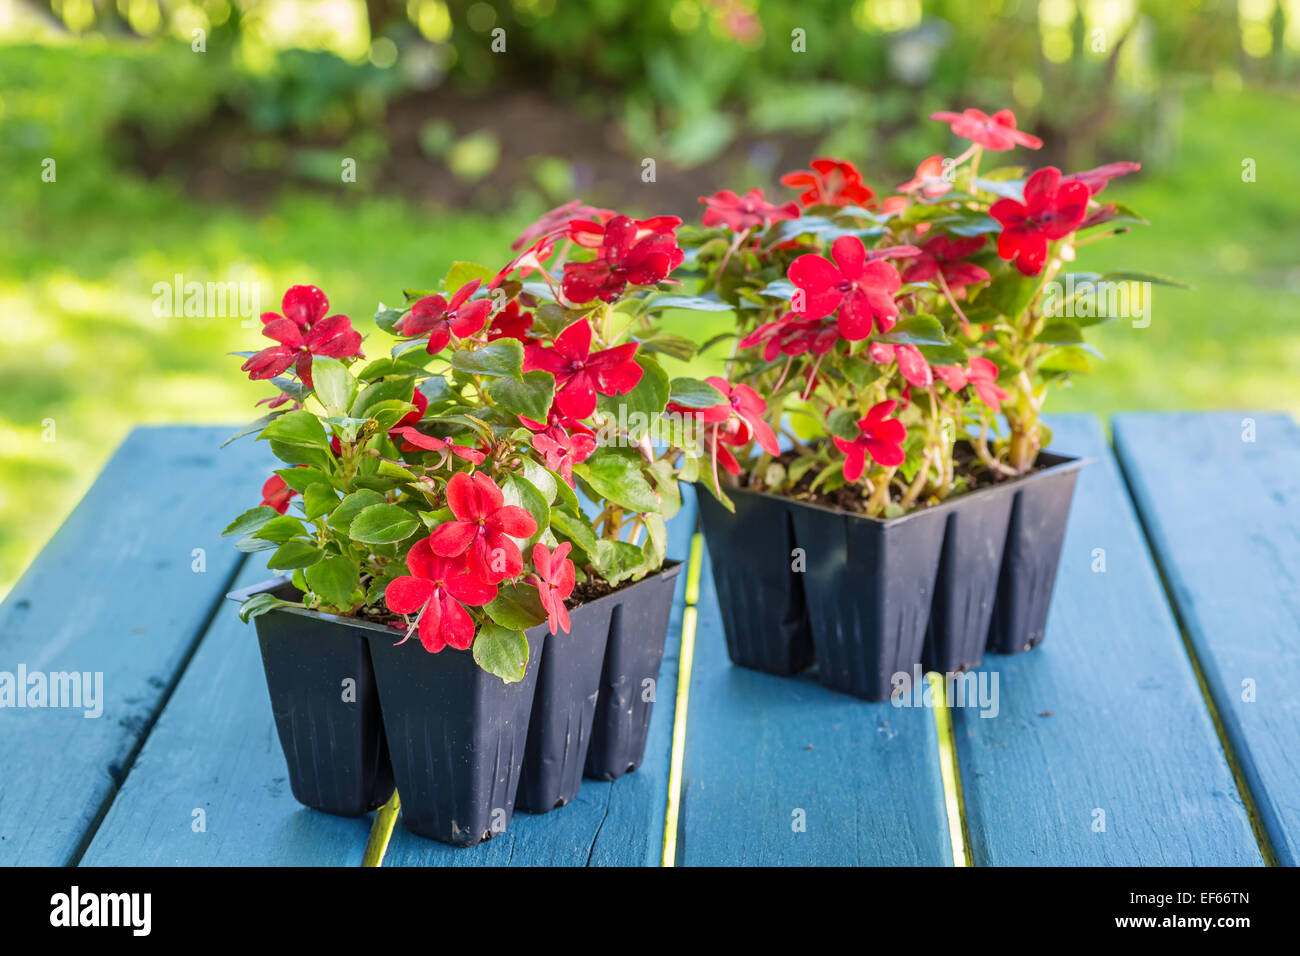 Greenhouse grown packs containing seedlings of impatiens plants ready for transplanting into a home garden. Stock Photo